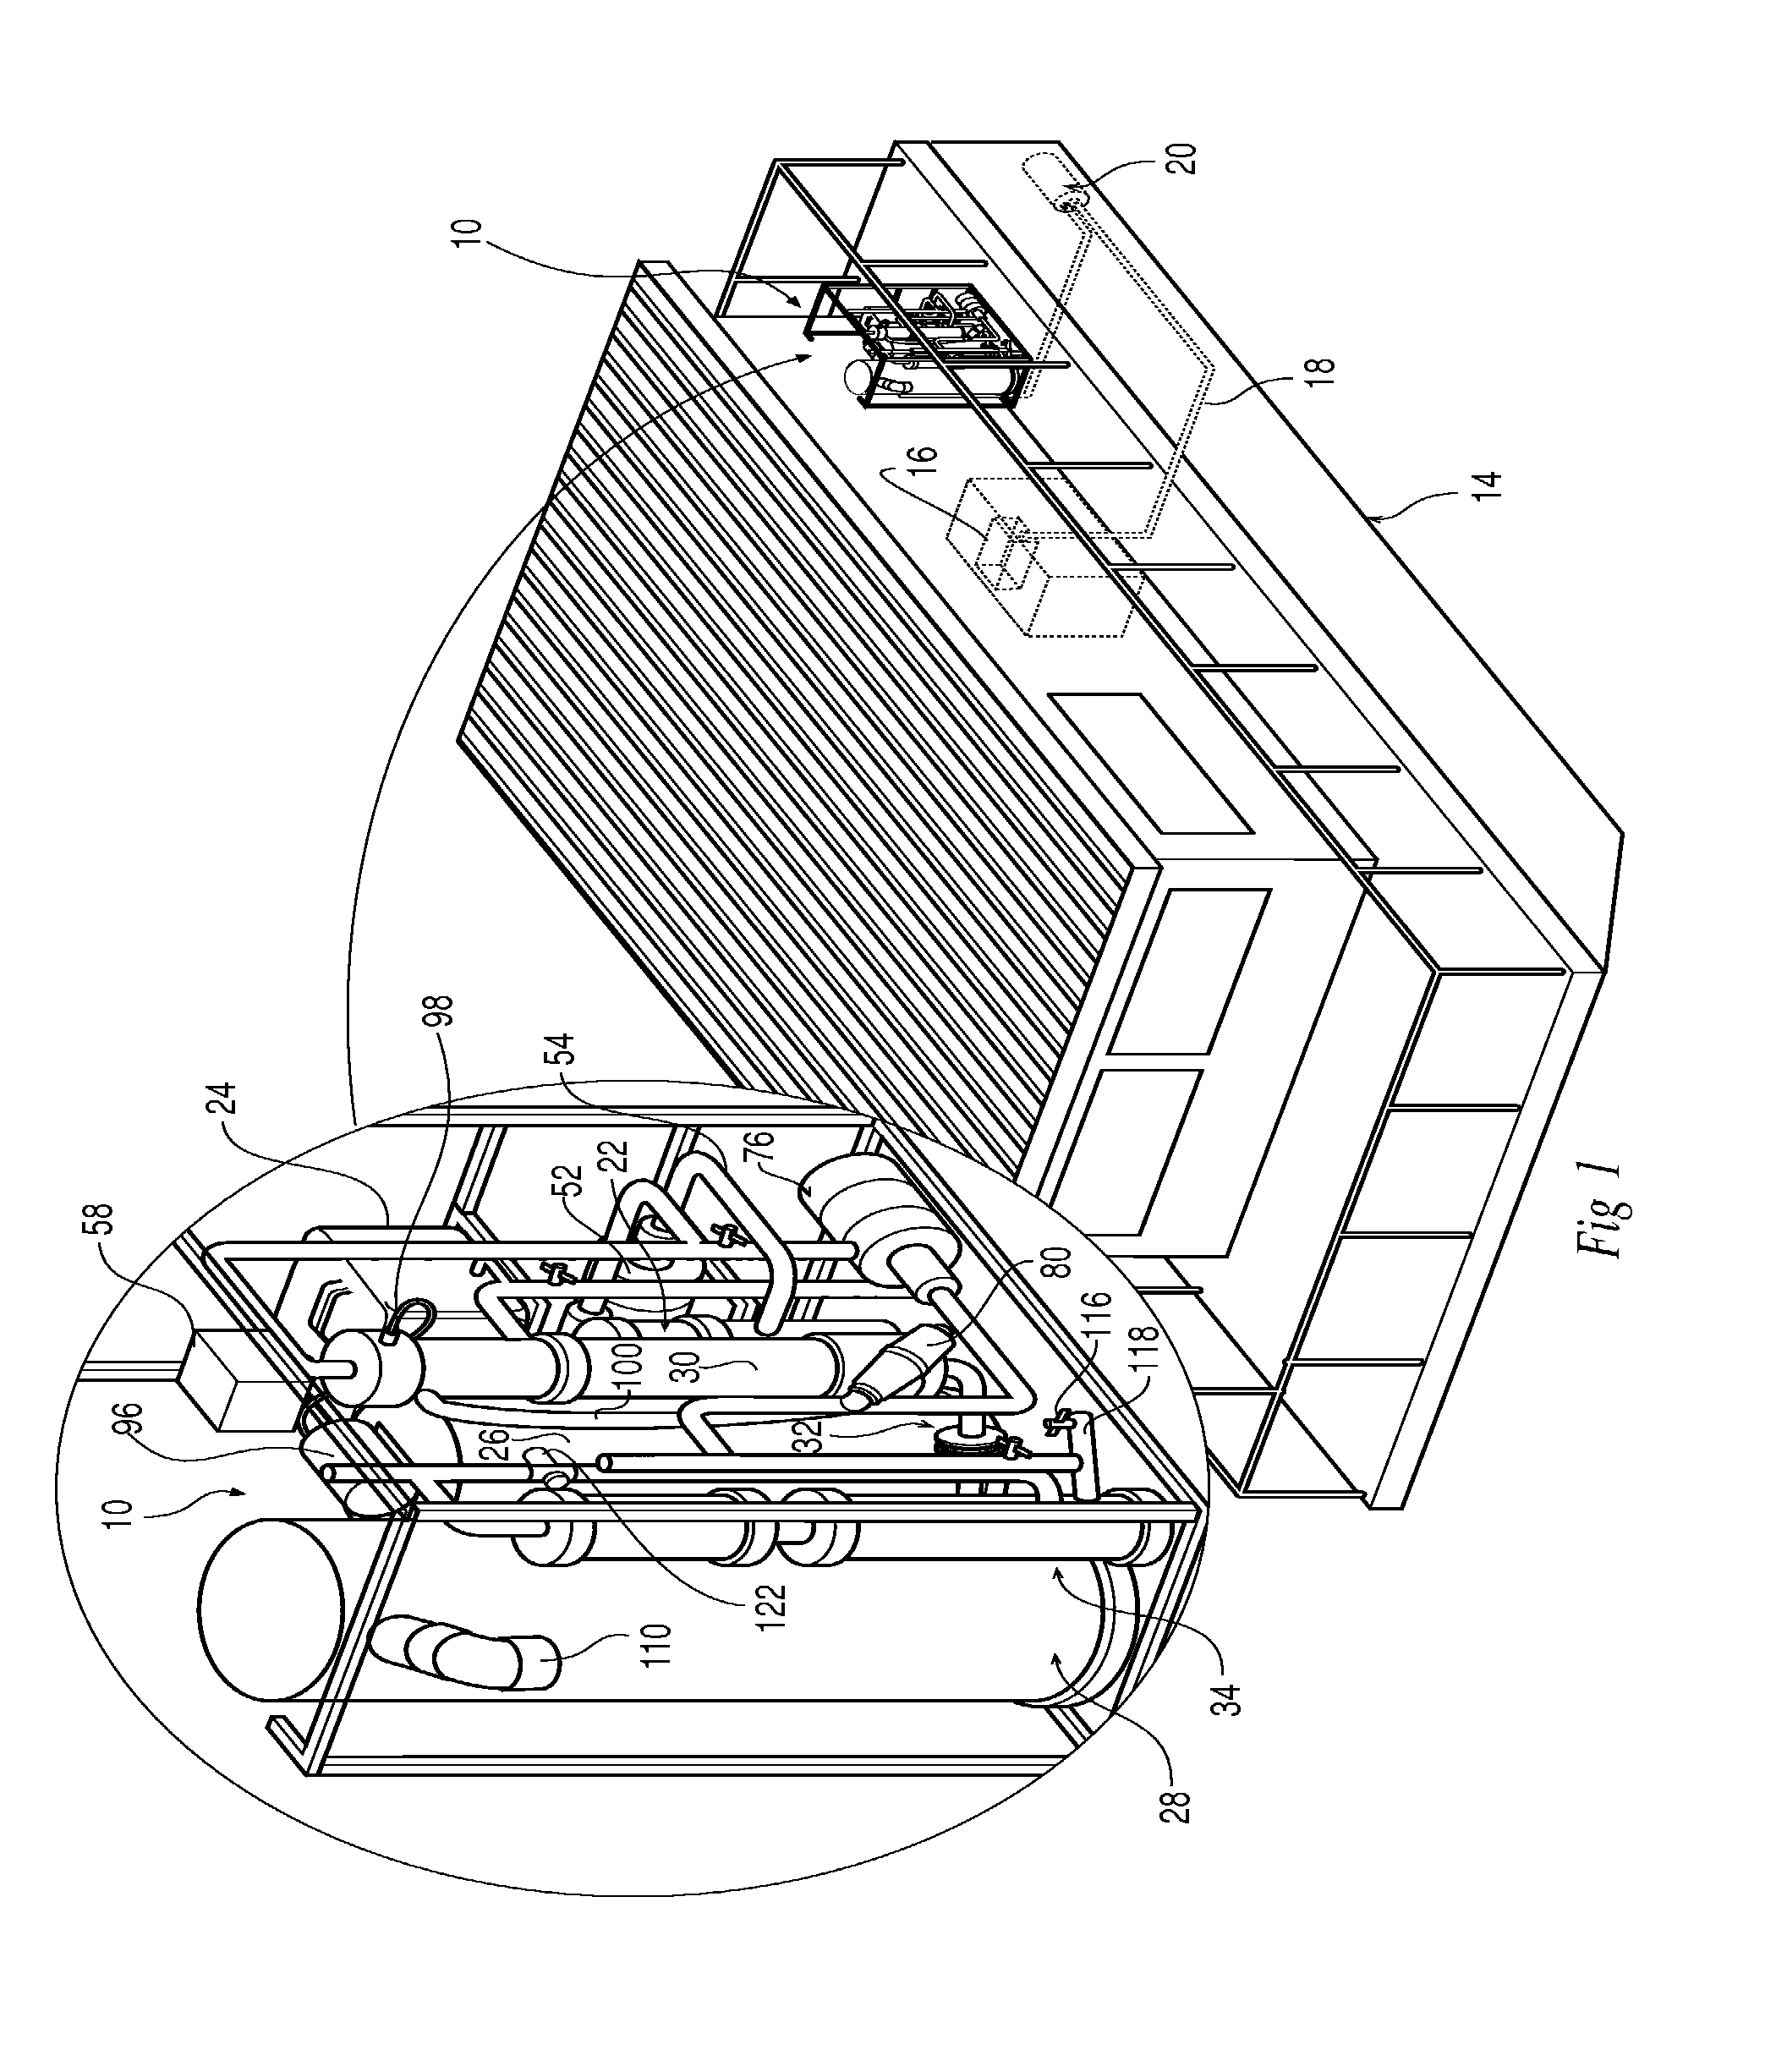 Apparatus and Method for the Treatment of Water